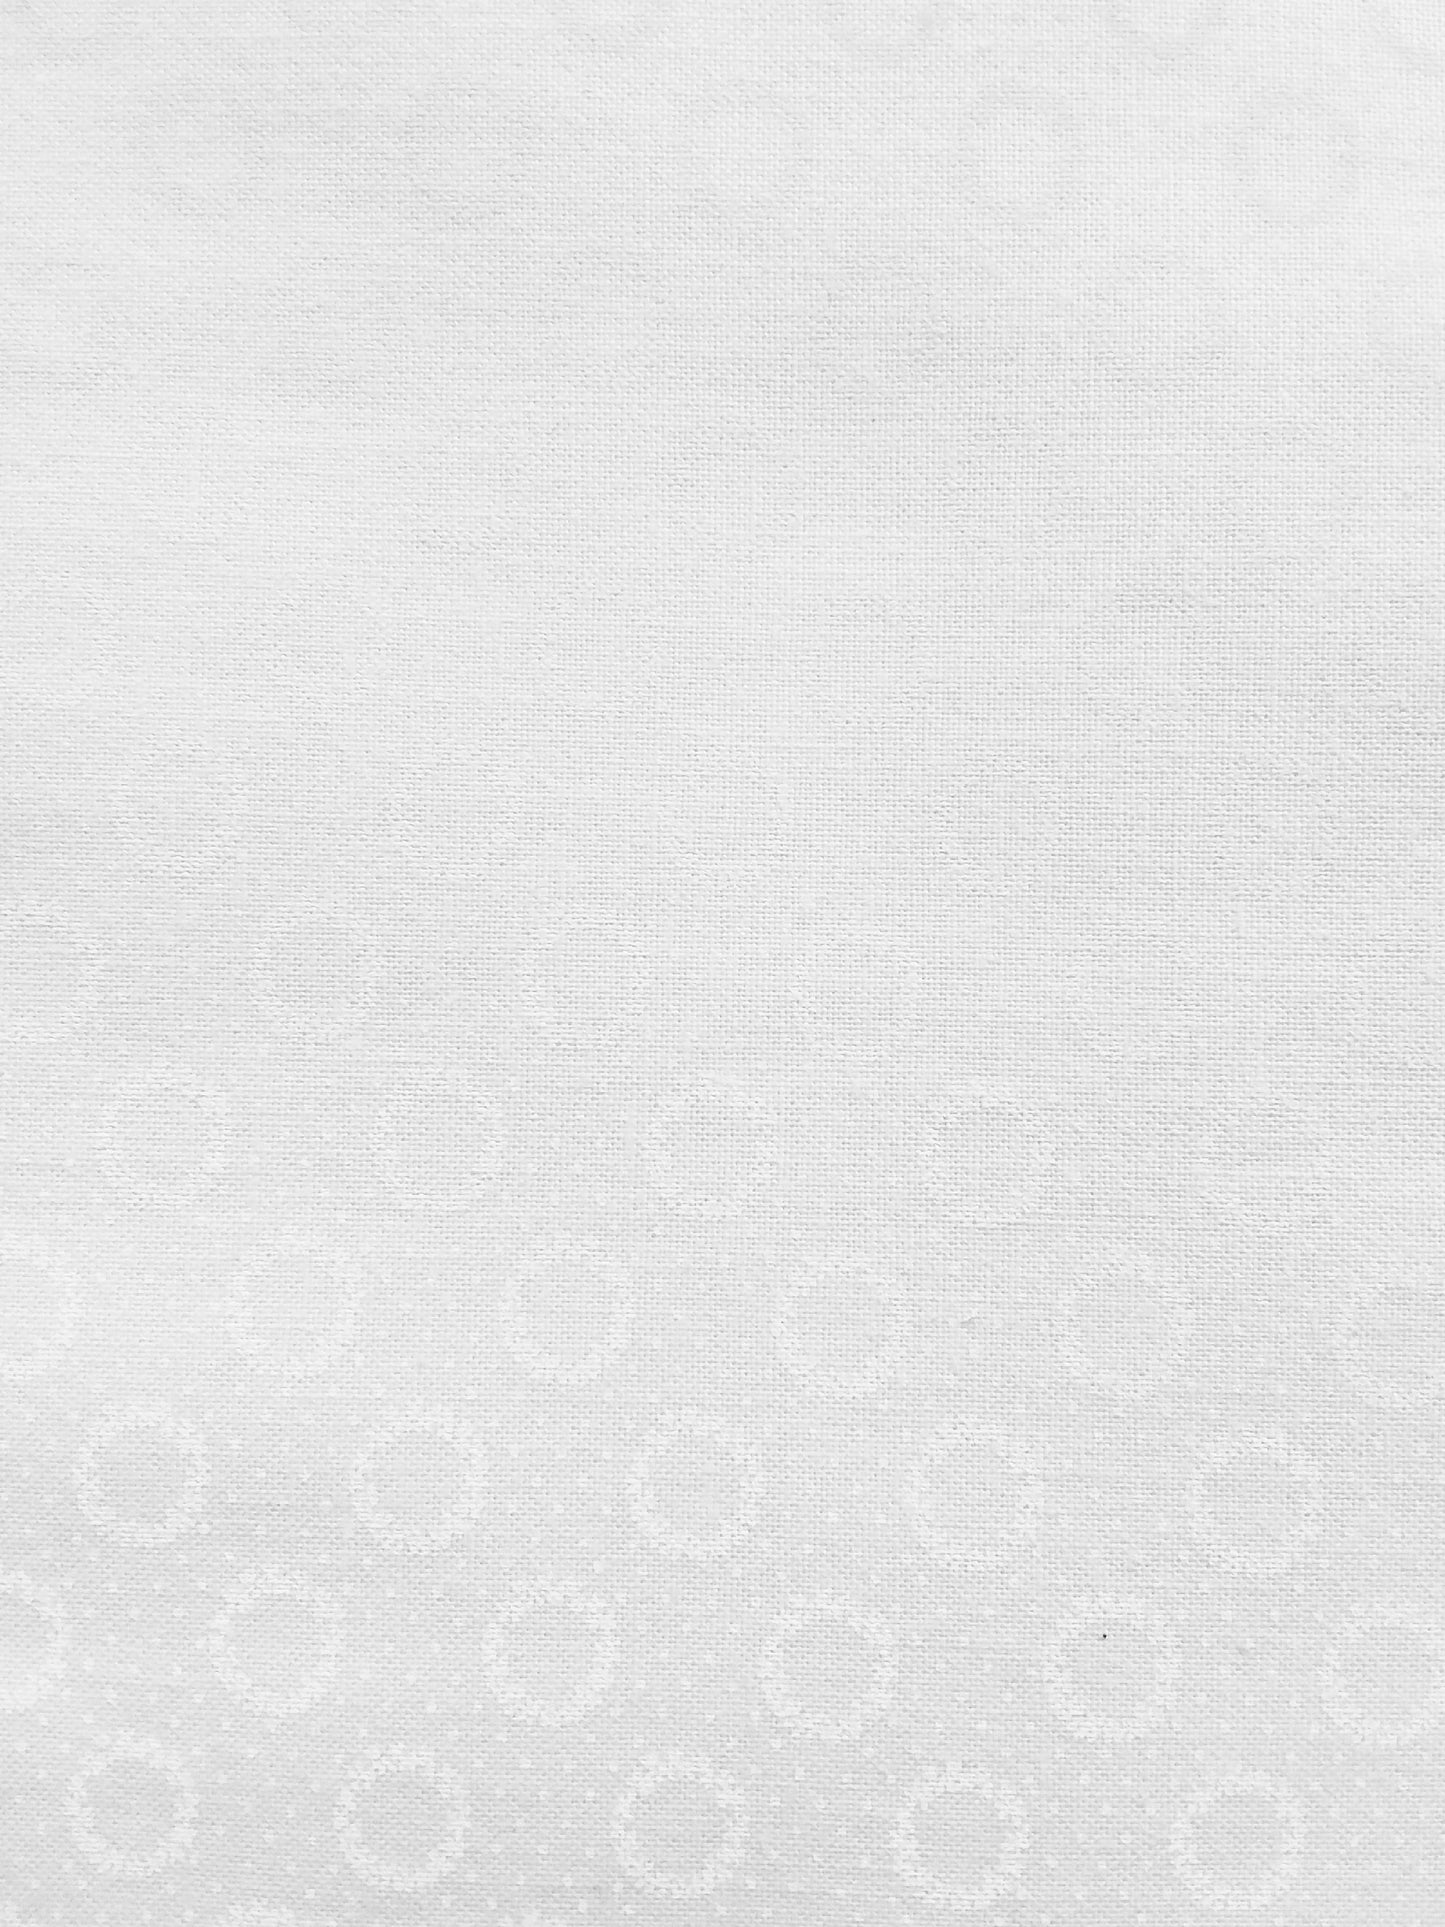 Quilter's Flour IV 399-01W Wreaths And Dots White on White by Henry Glass Fabrics